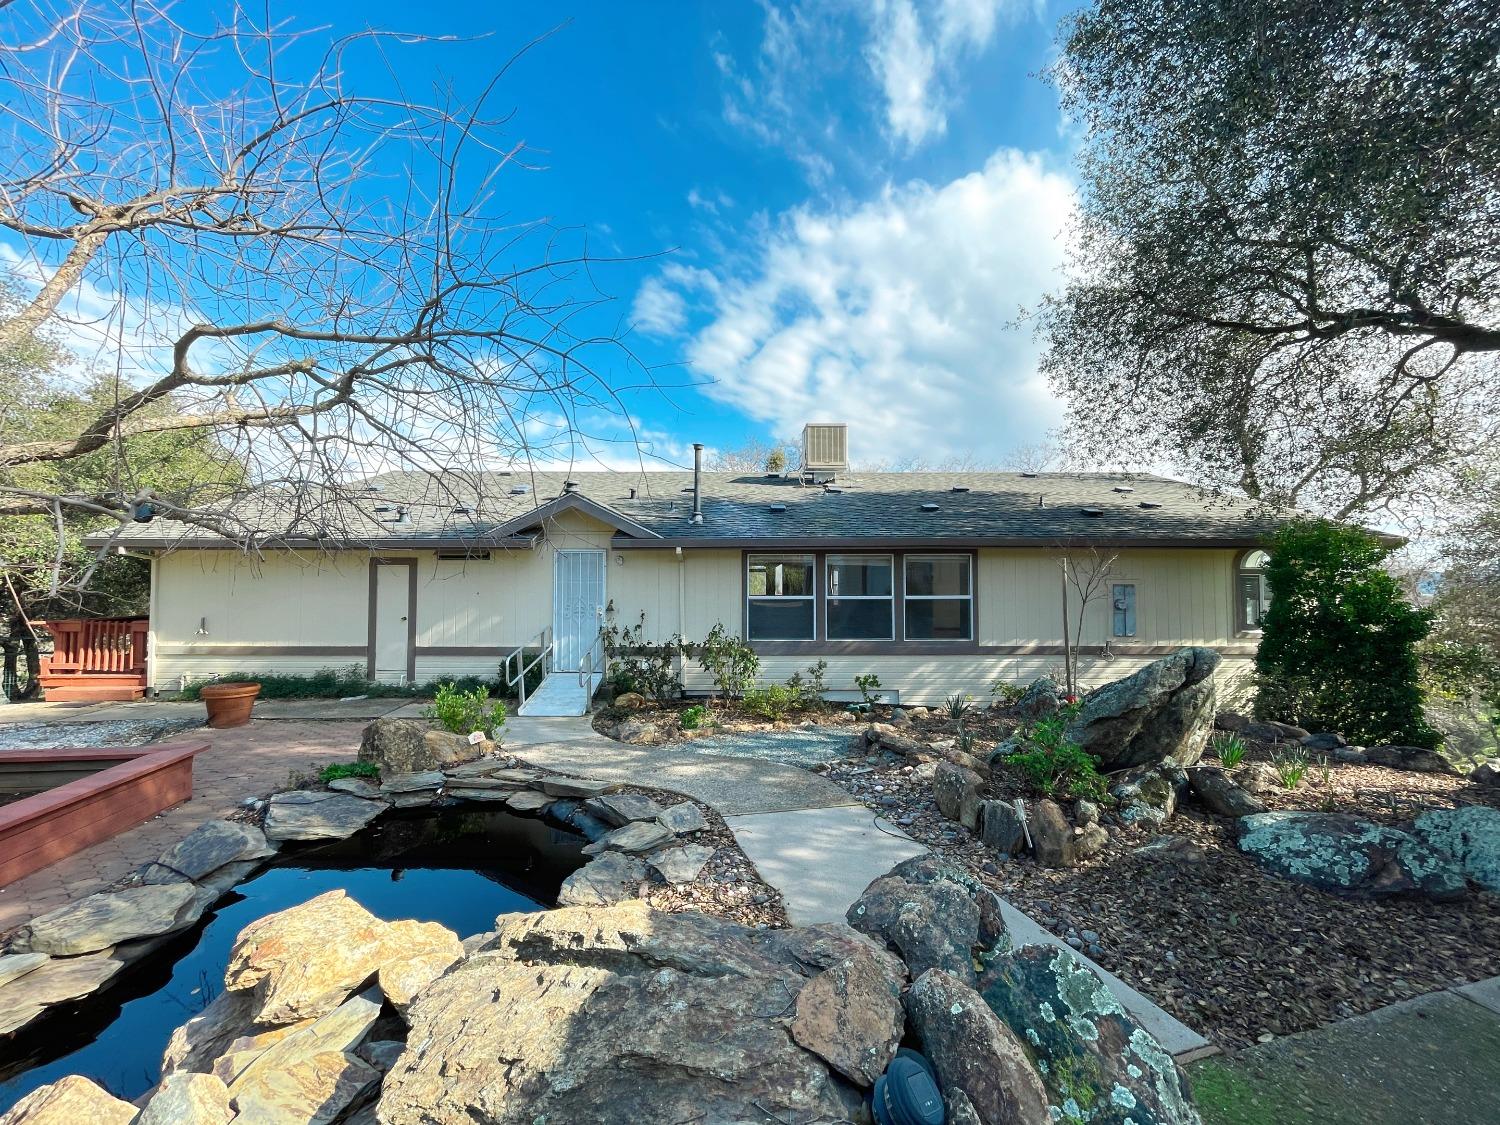 Photo of 3445 Bow Dr in Copperopolis, CA